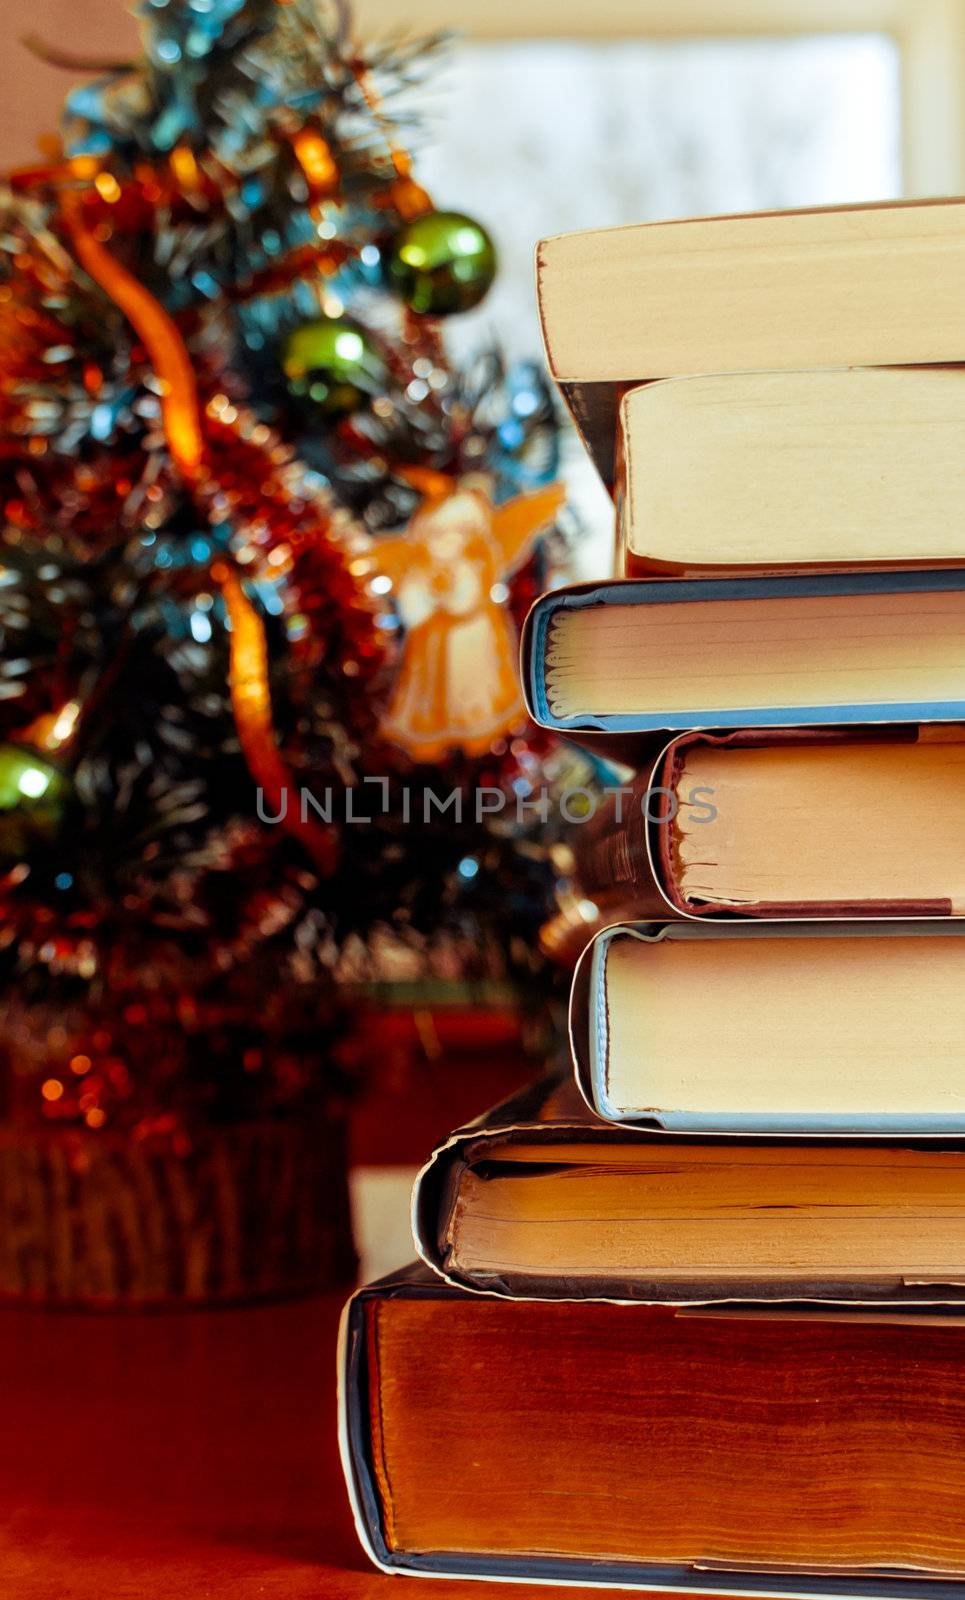 Books laying in front of Chrismas tree